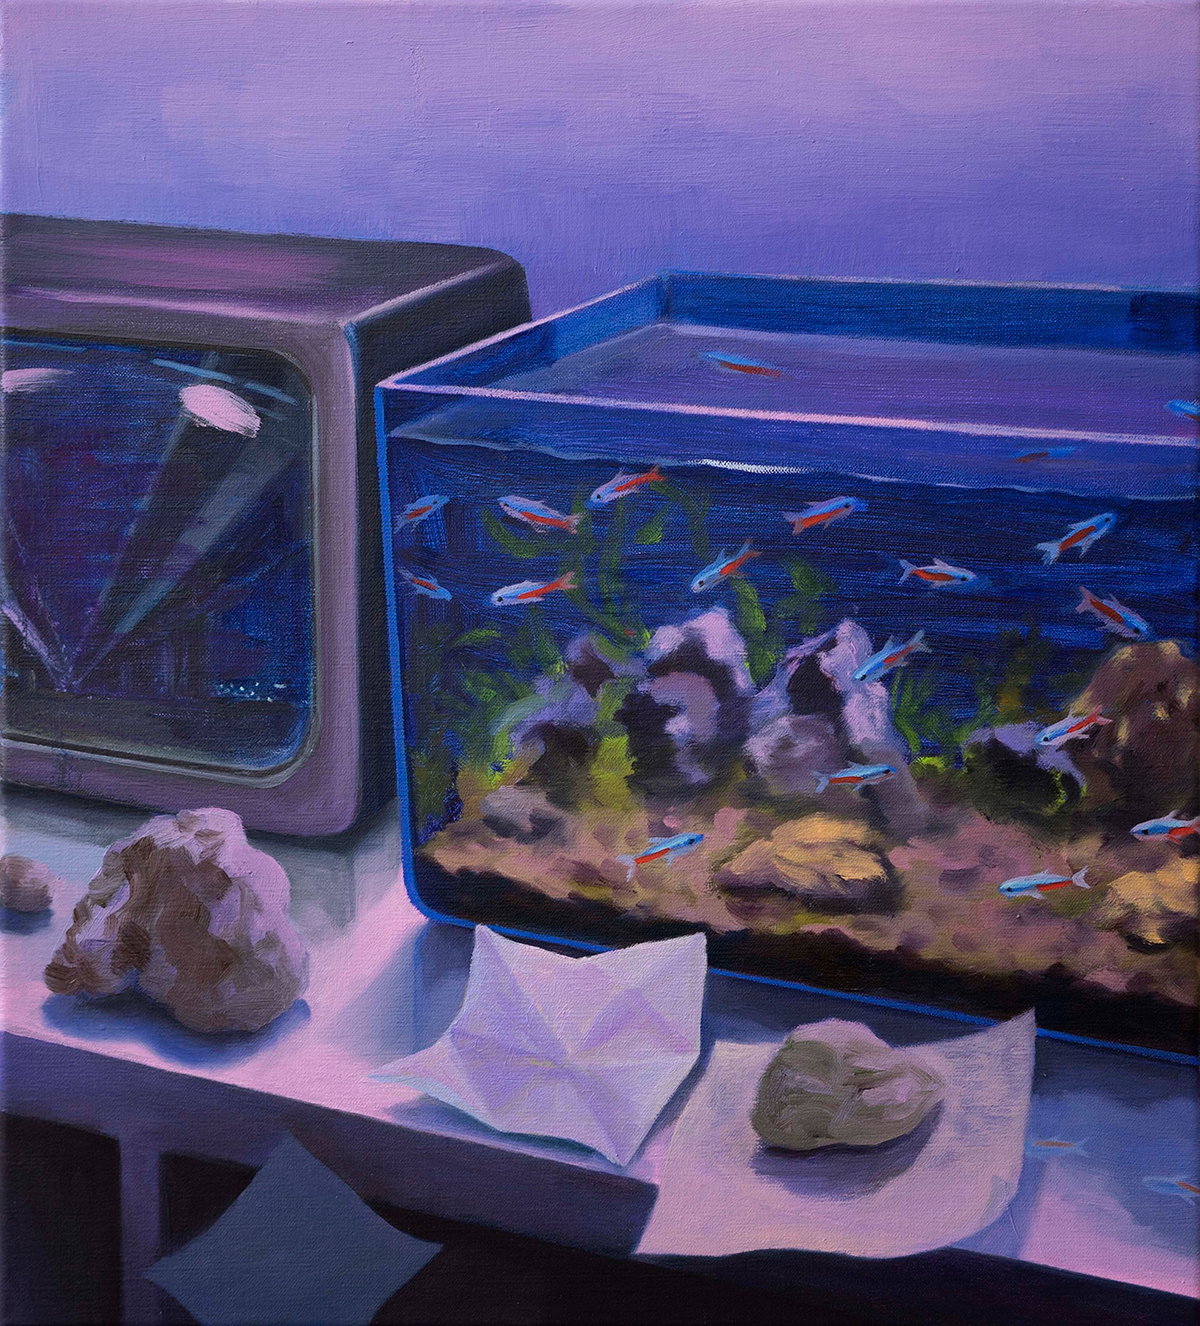 Painting of a fish tank with colorful guppies in it